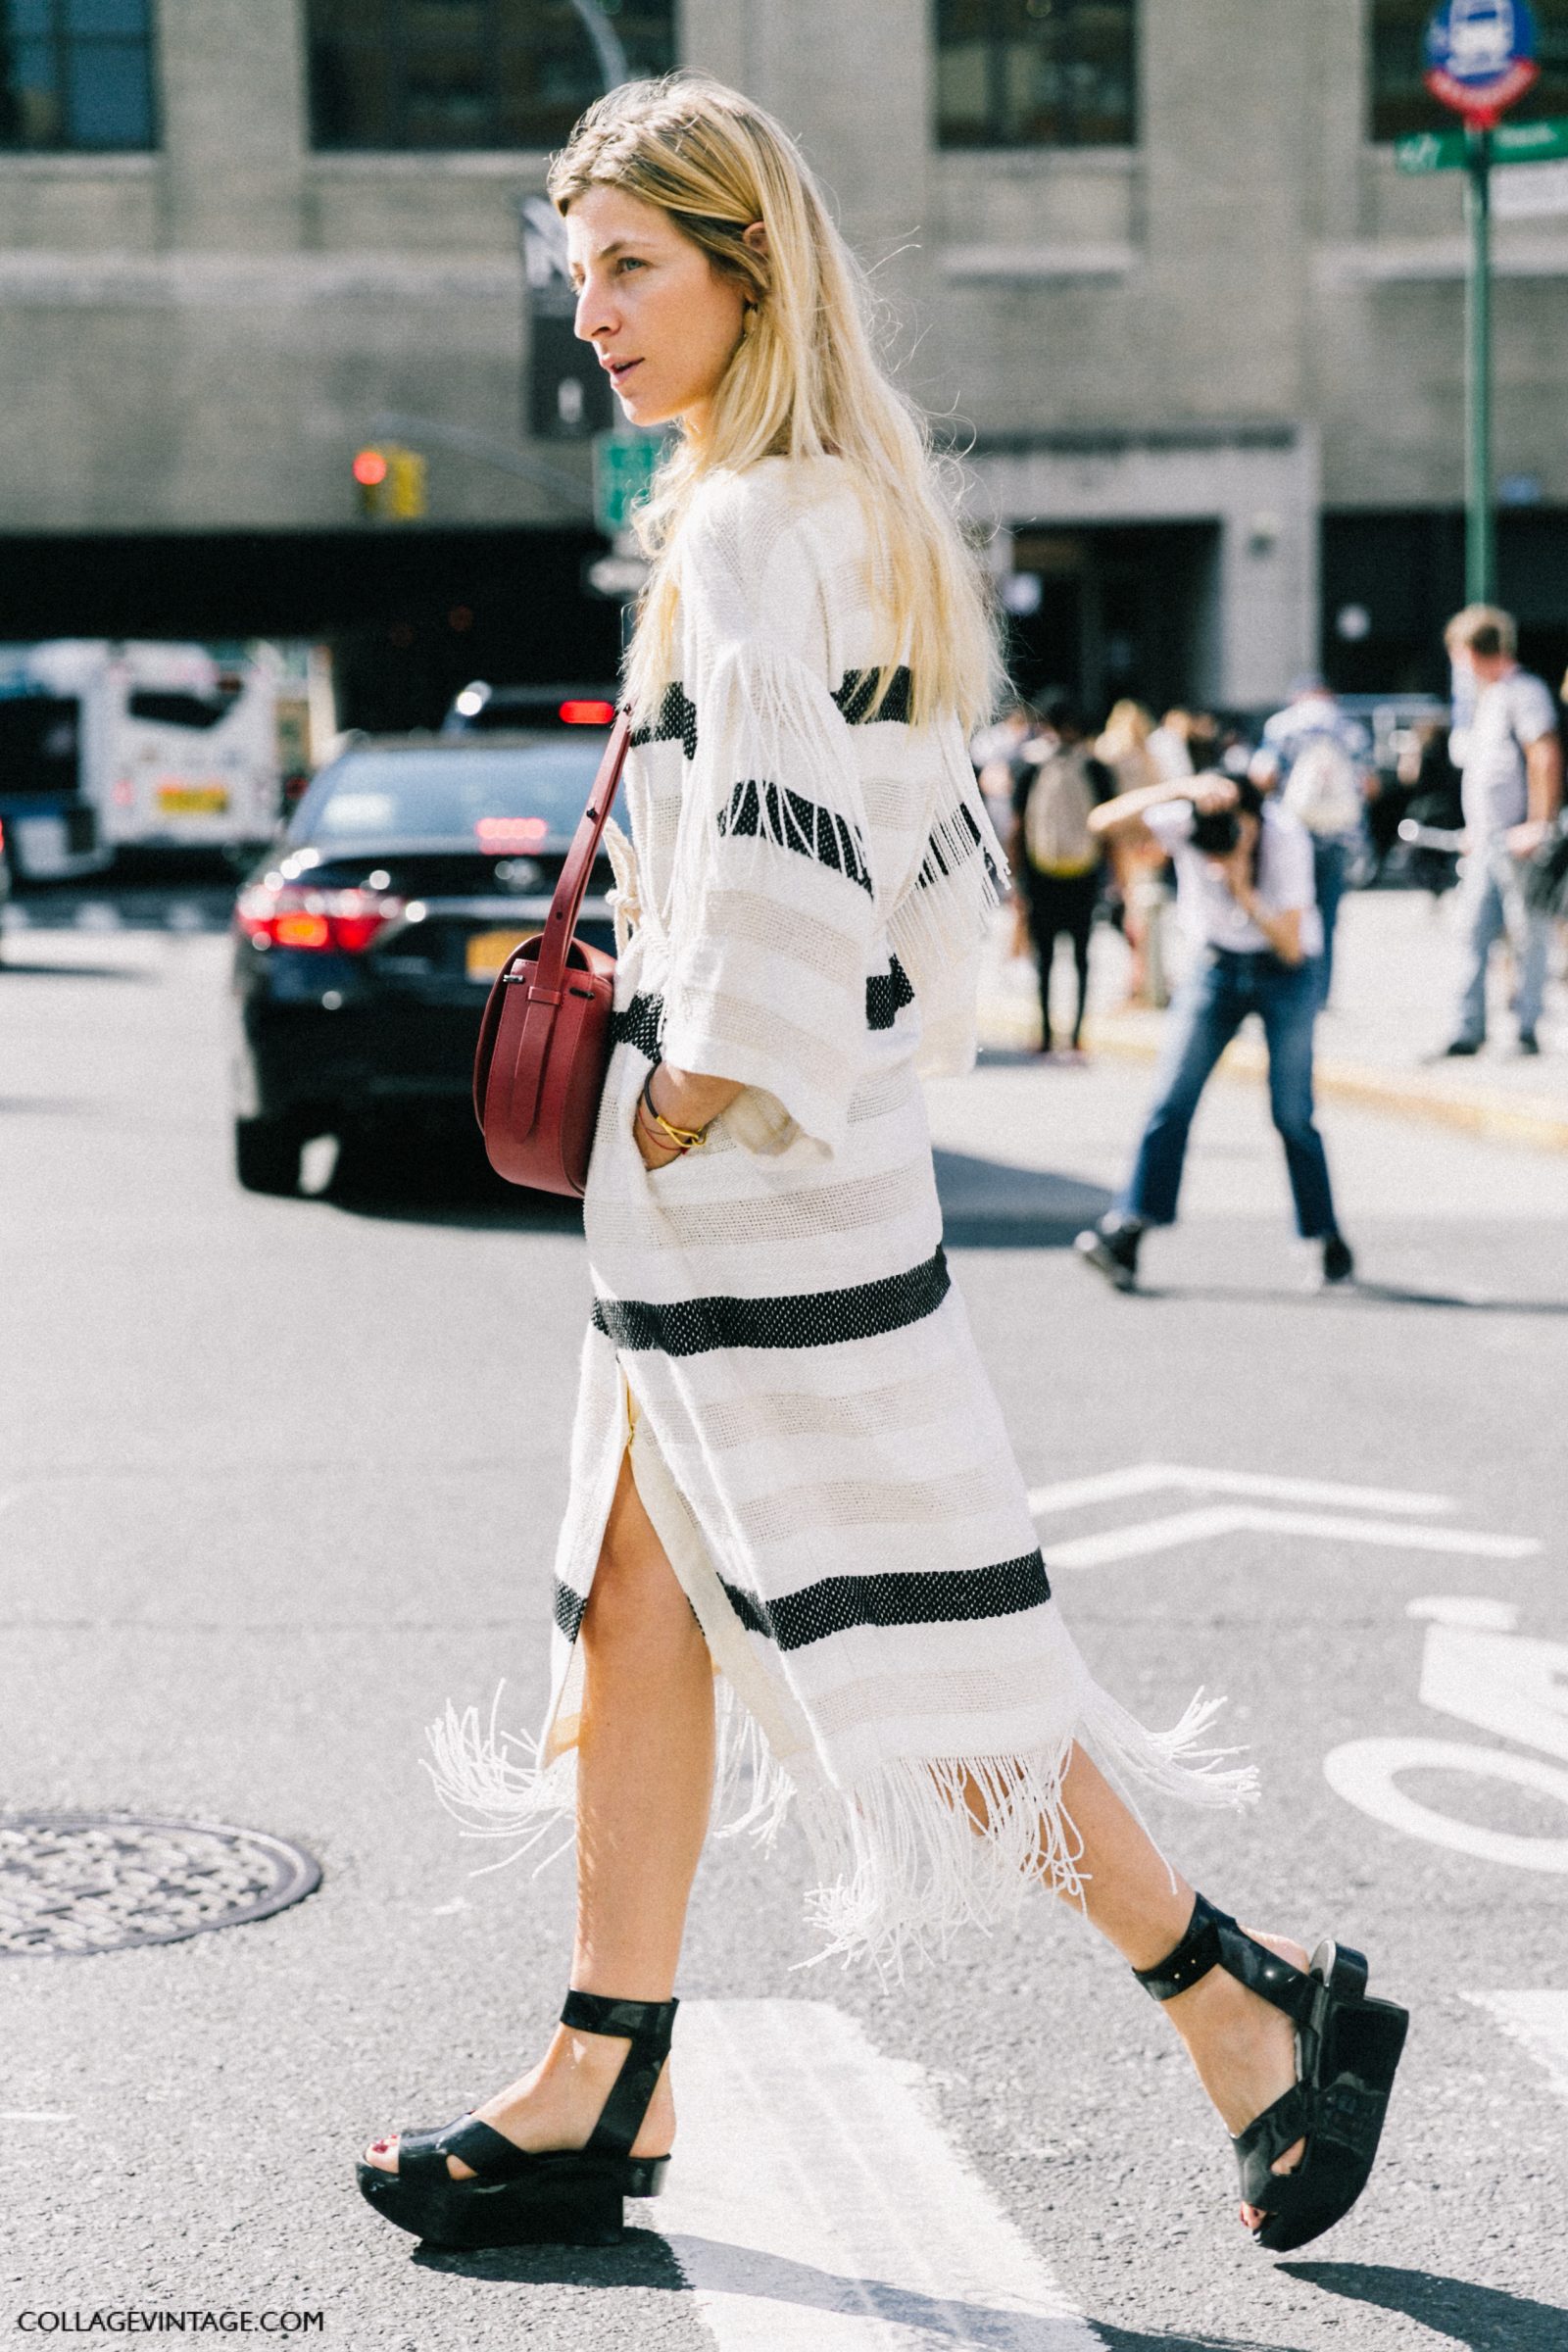 nyfw-new_york_fashion_week_ss17-street_style-outfits-collage_vintage-vintage-phillip_lim-the-row-proenza_schouler-rossie_aussolin-362